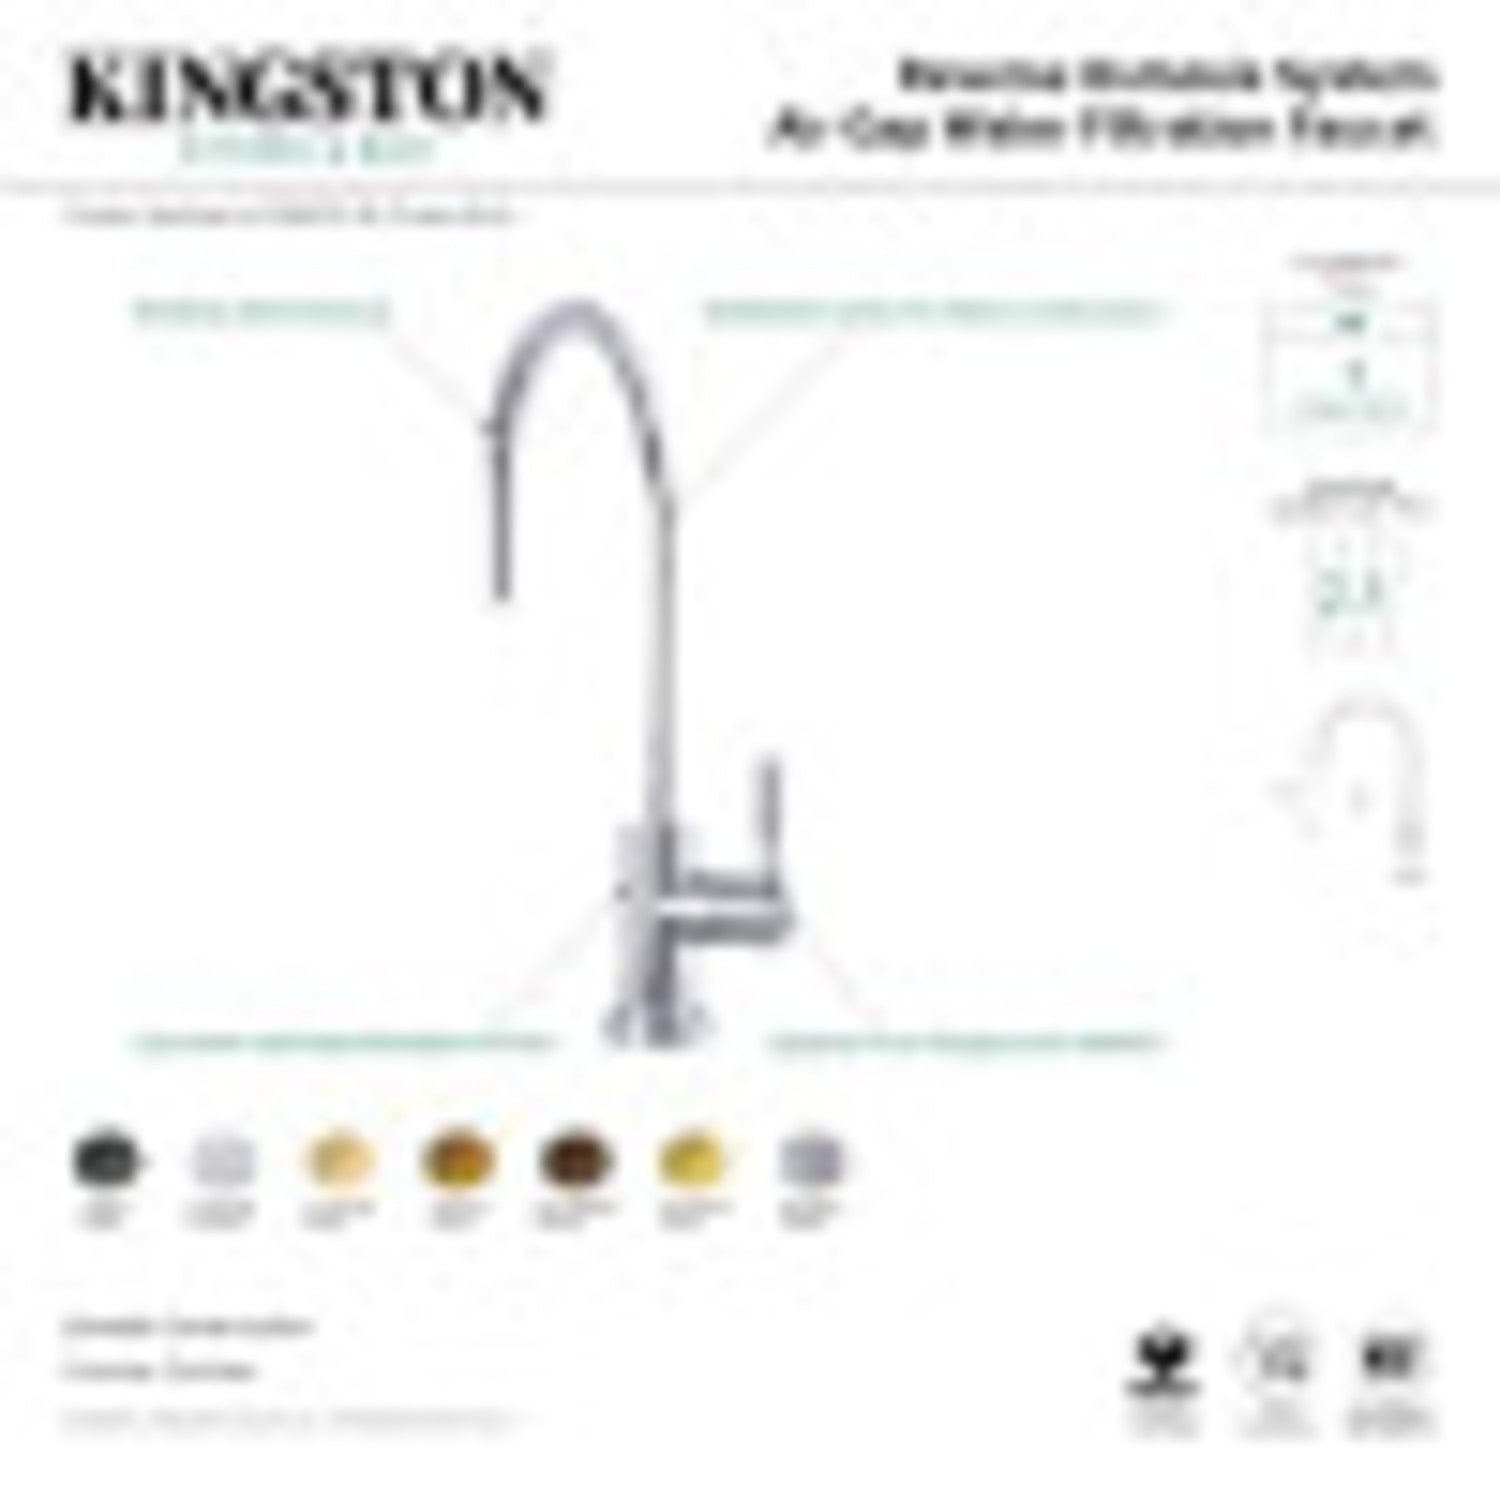 KINGSTON Brass Concord Reverse Osmosis System Filtration Water Air Gap Faucet - Brushed Brass